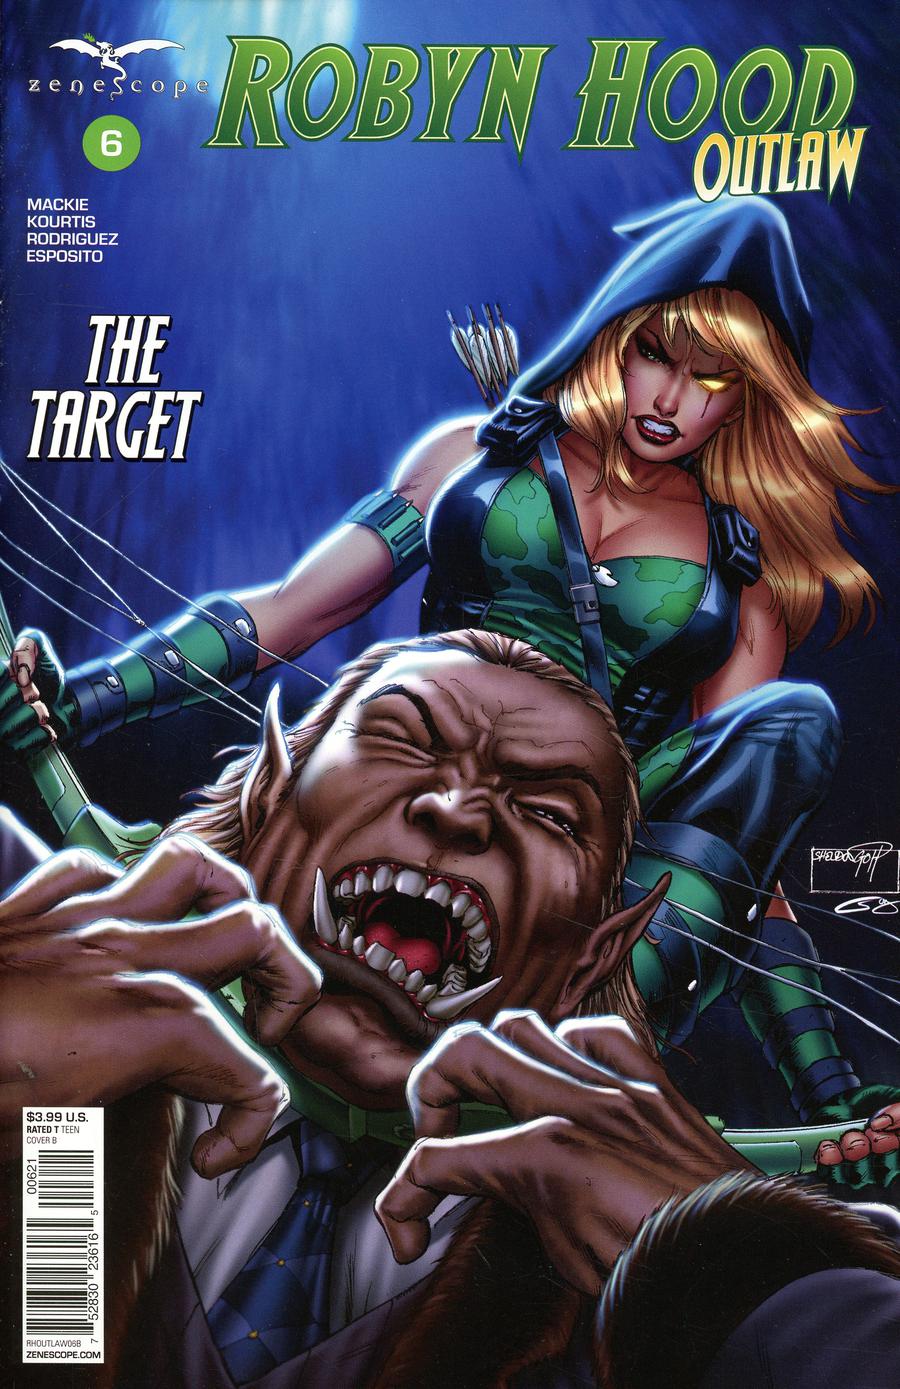 Grimm Fairy Tales Presents Robyn Hood Outlaw #6 Cover B Sheldon Goh